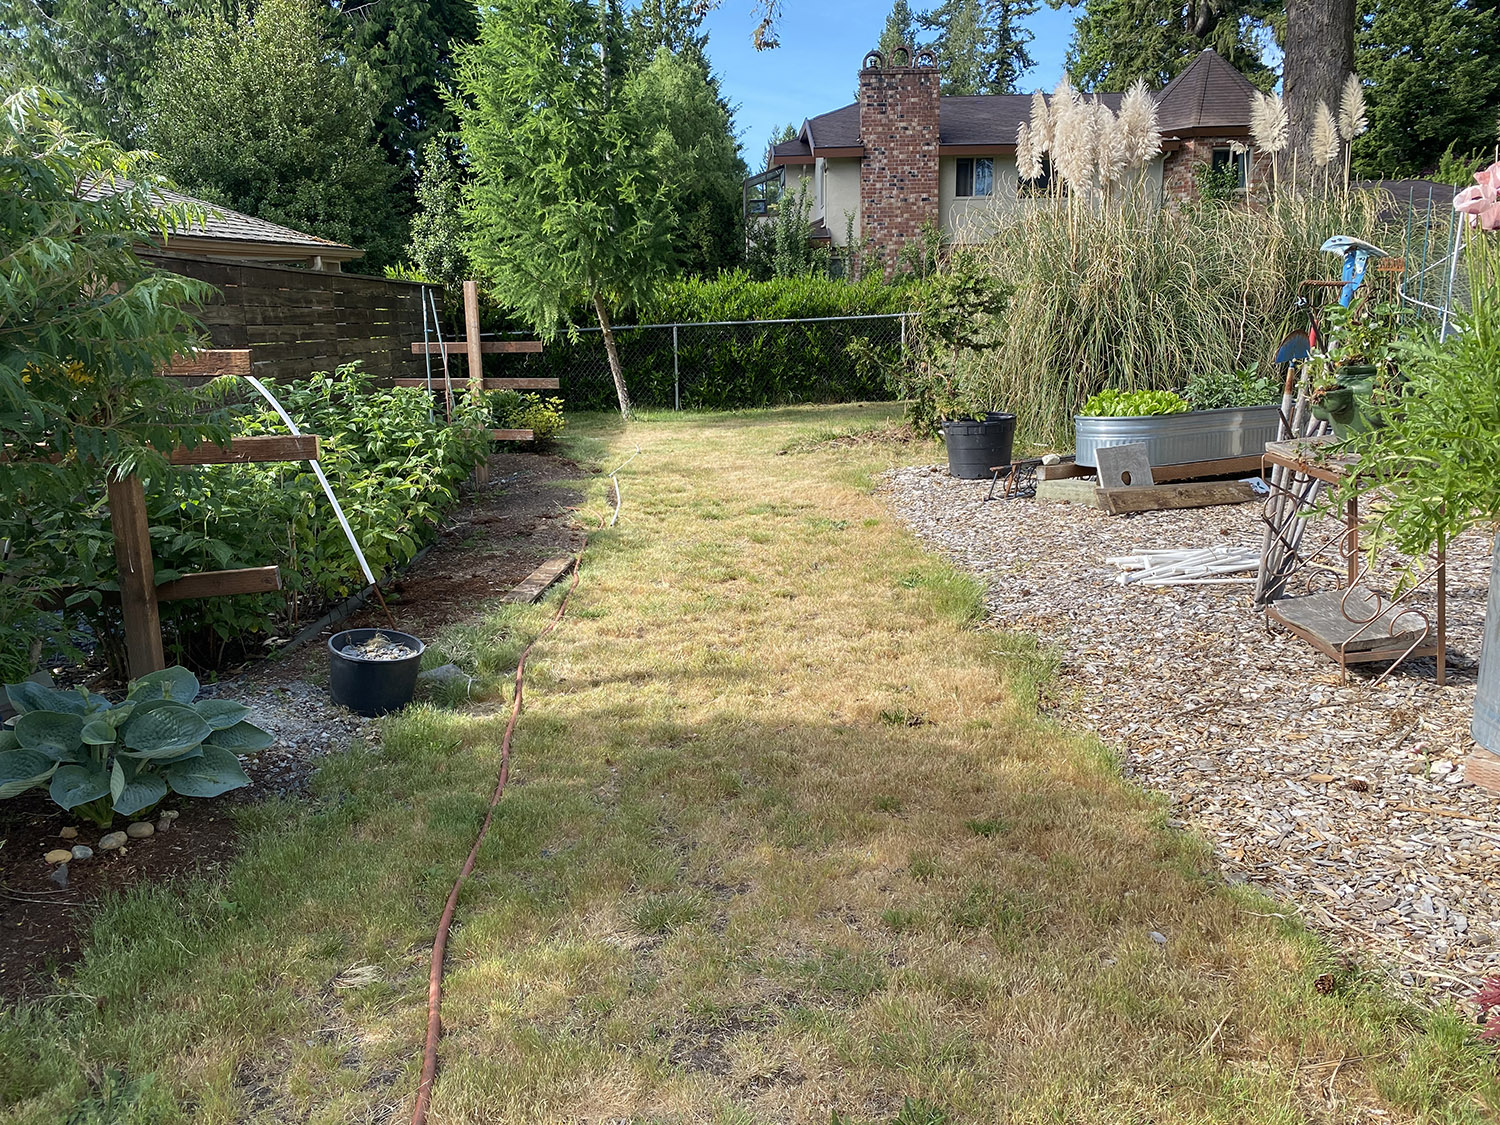 Photo of a yard with a garden on either side.